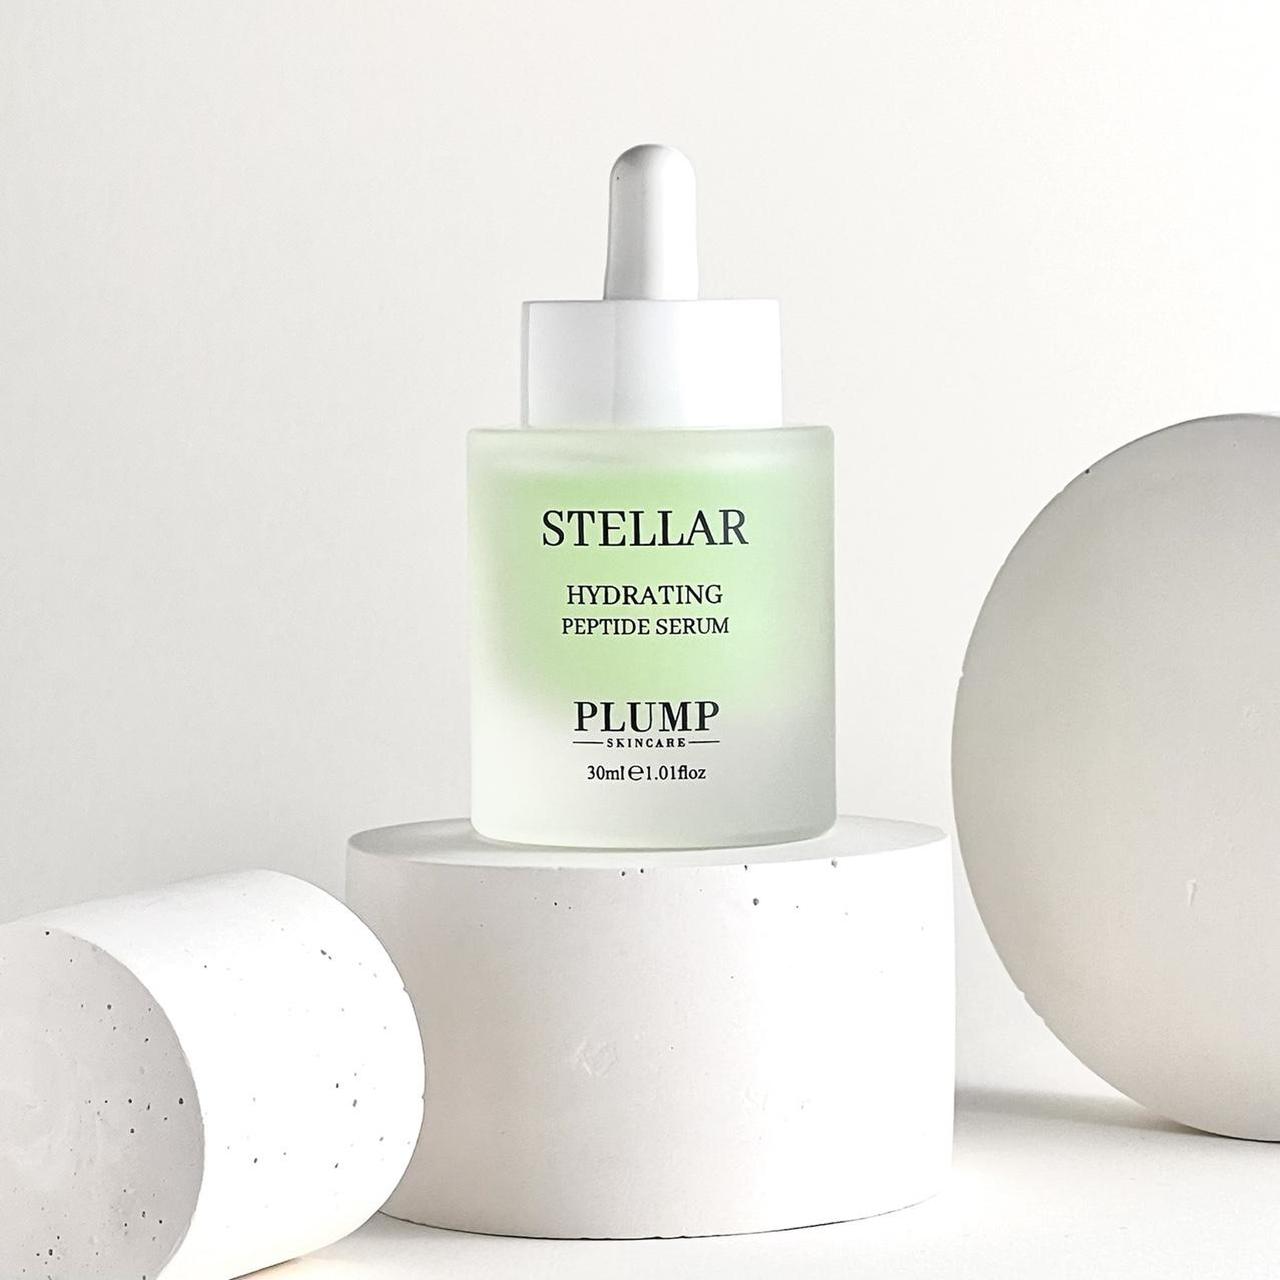 Product Image 1 - The Stellar Peptide Serum is